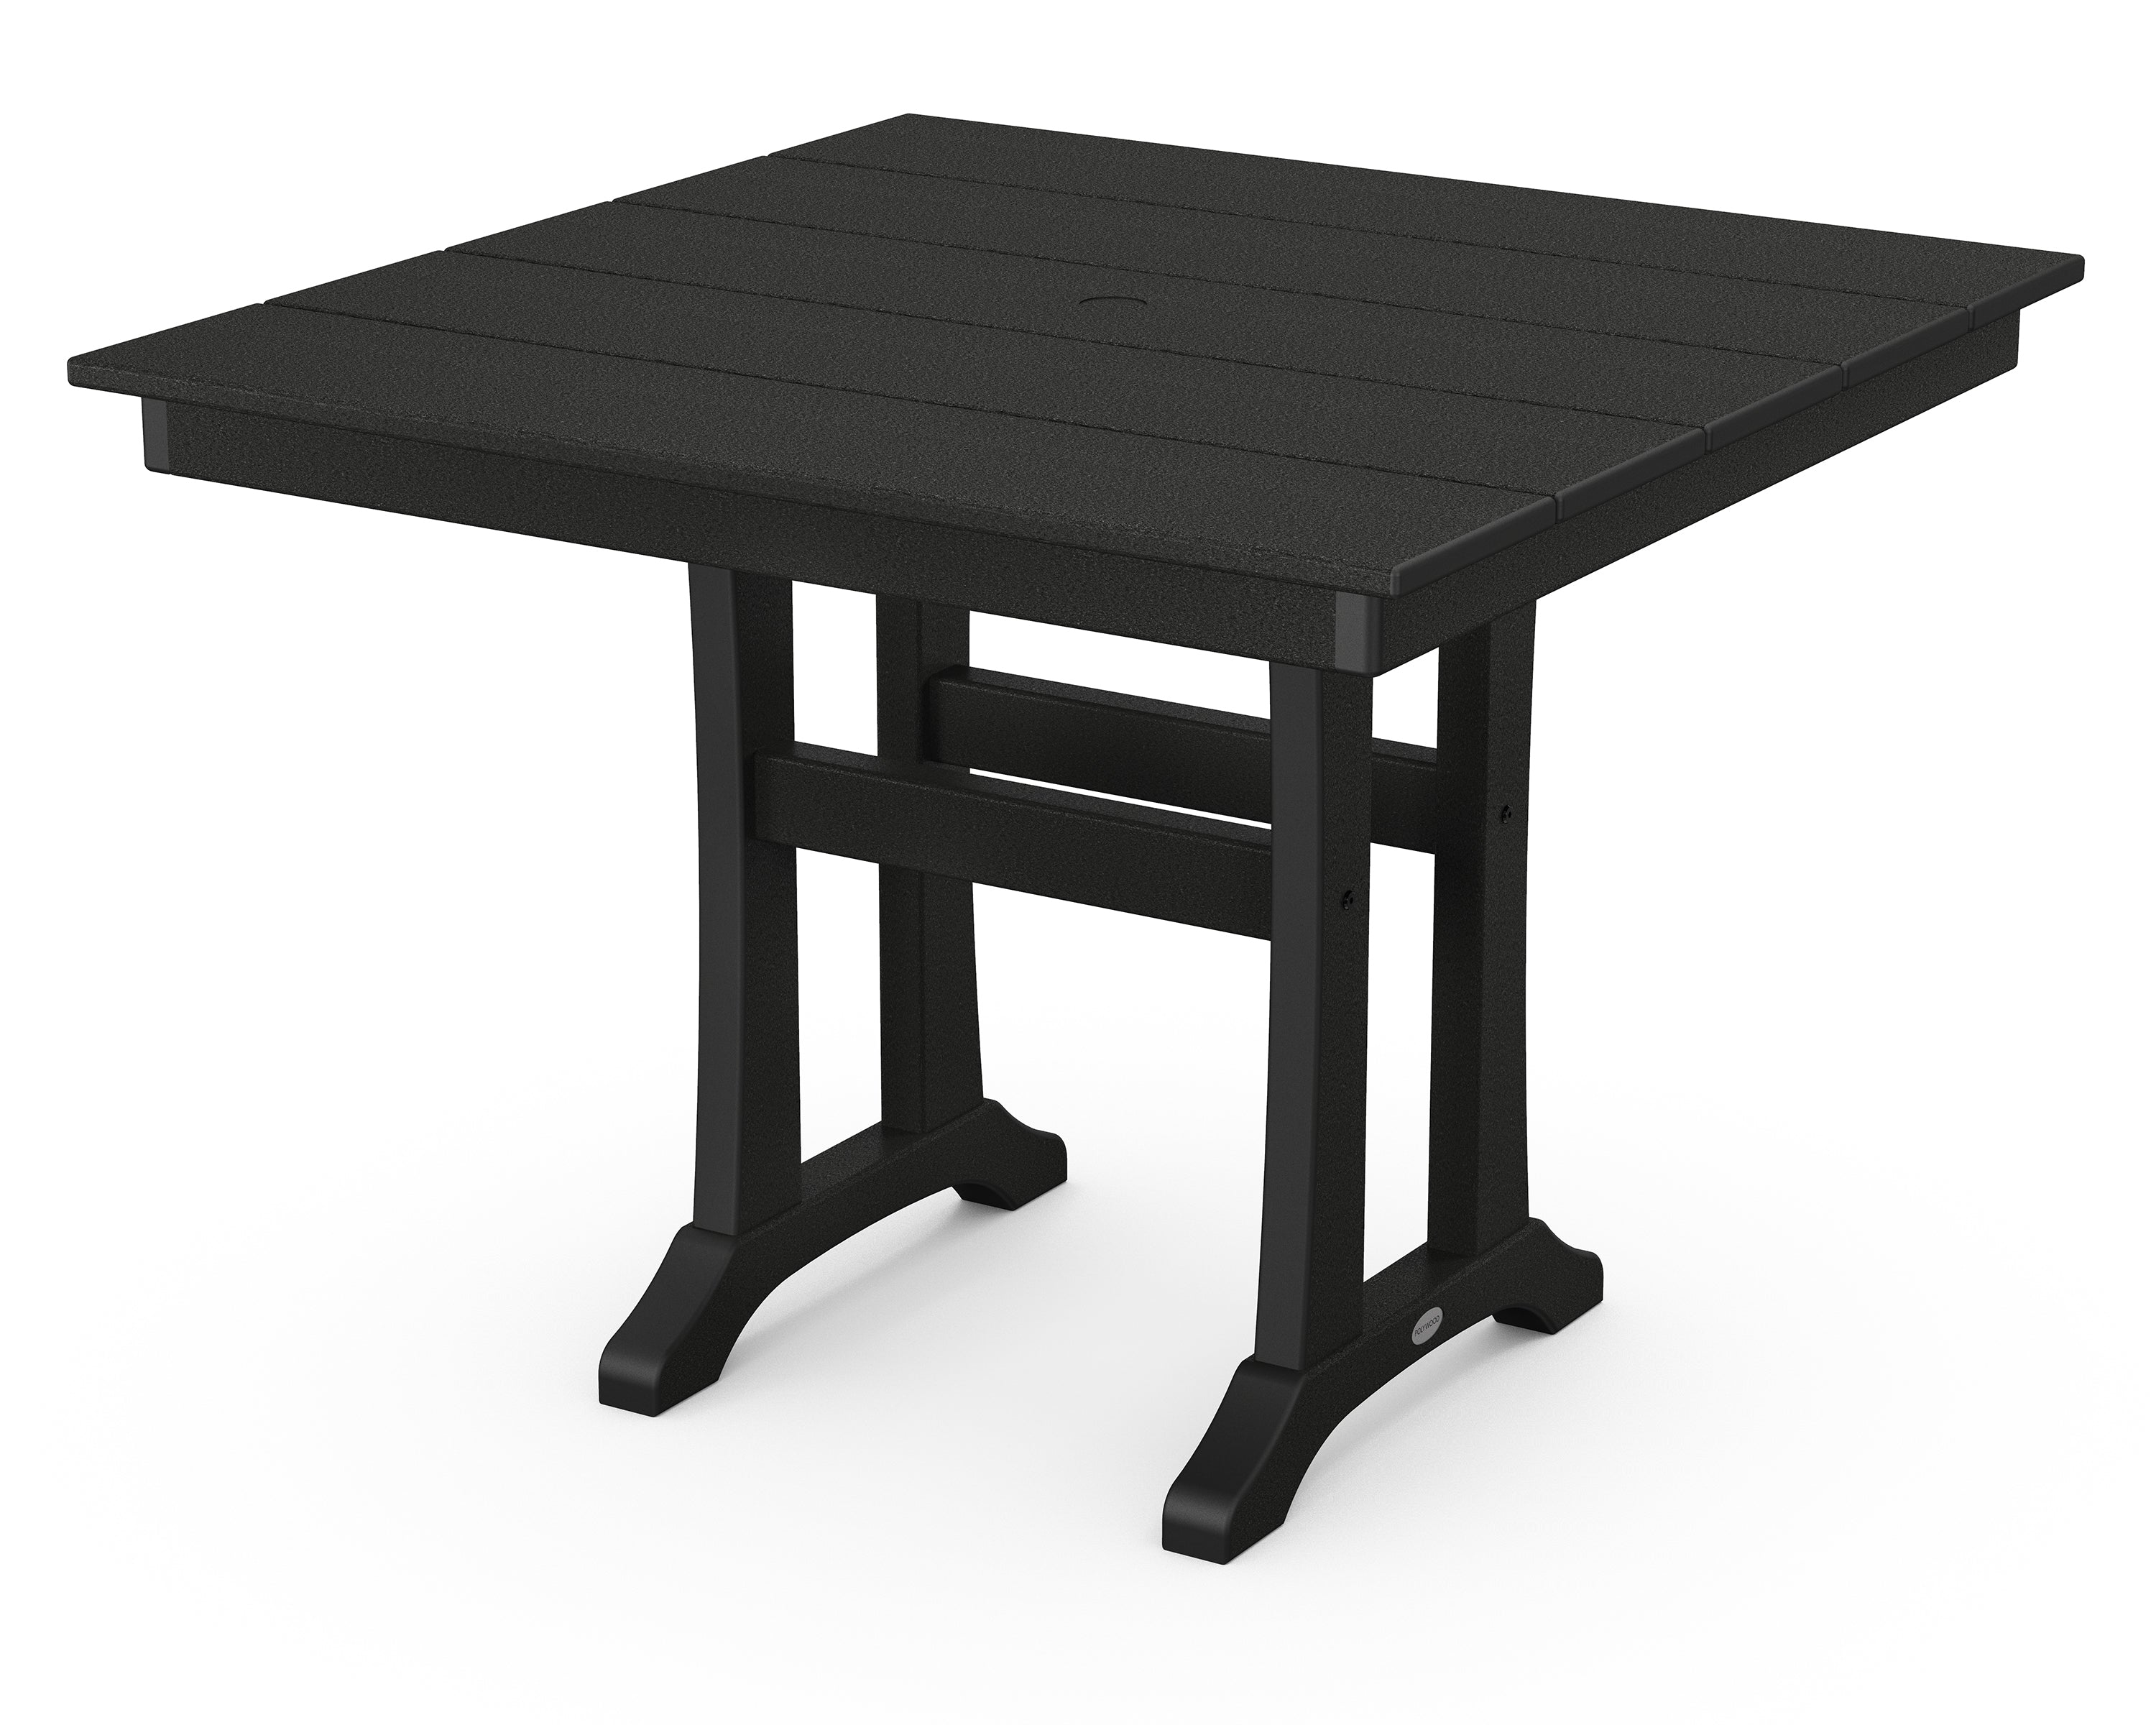 POLYWOOD Farmhouse Trestle 37 inch Square Dining Table Outdoor Tables Black 12041635